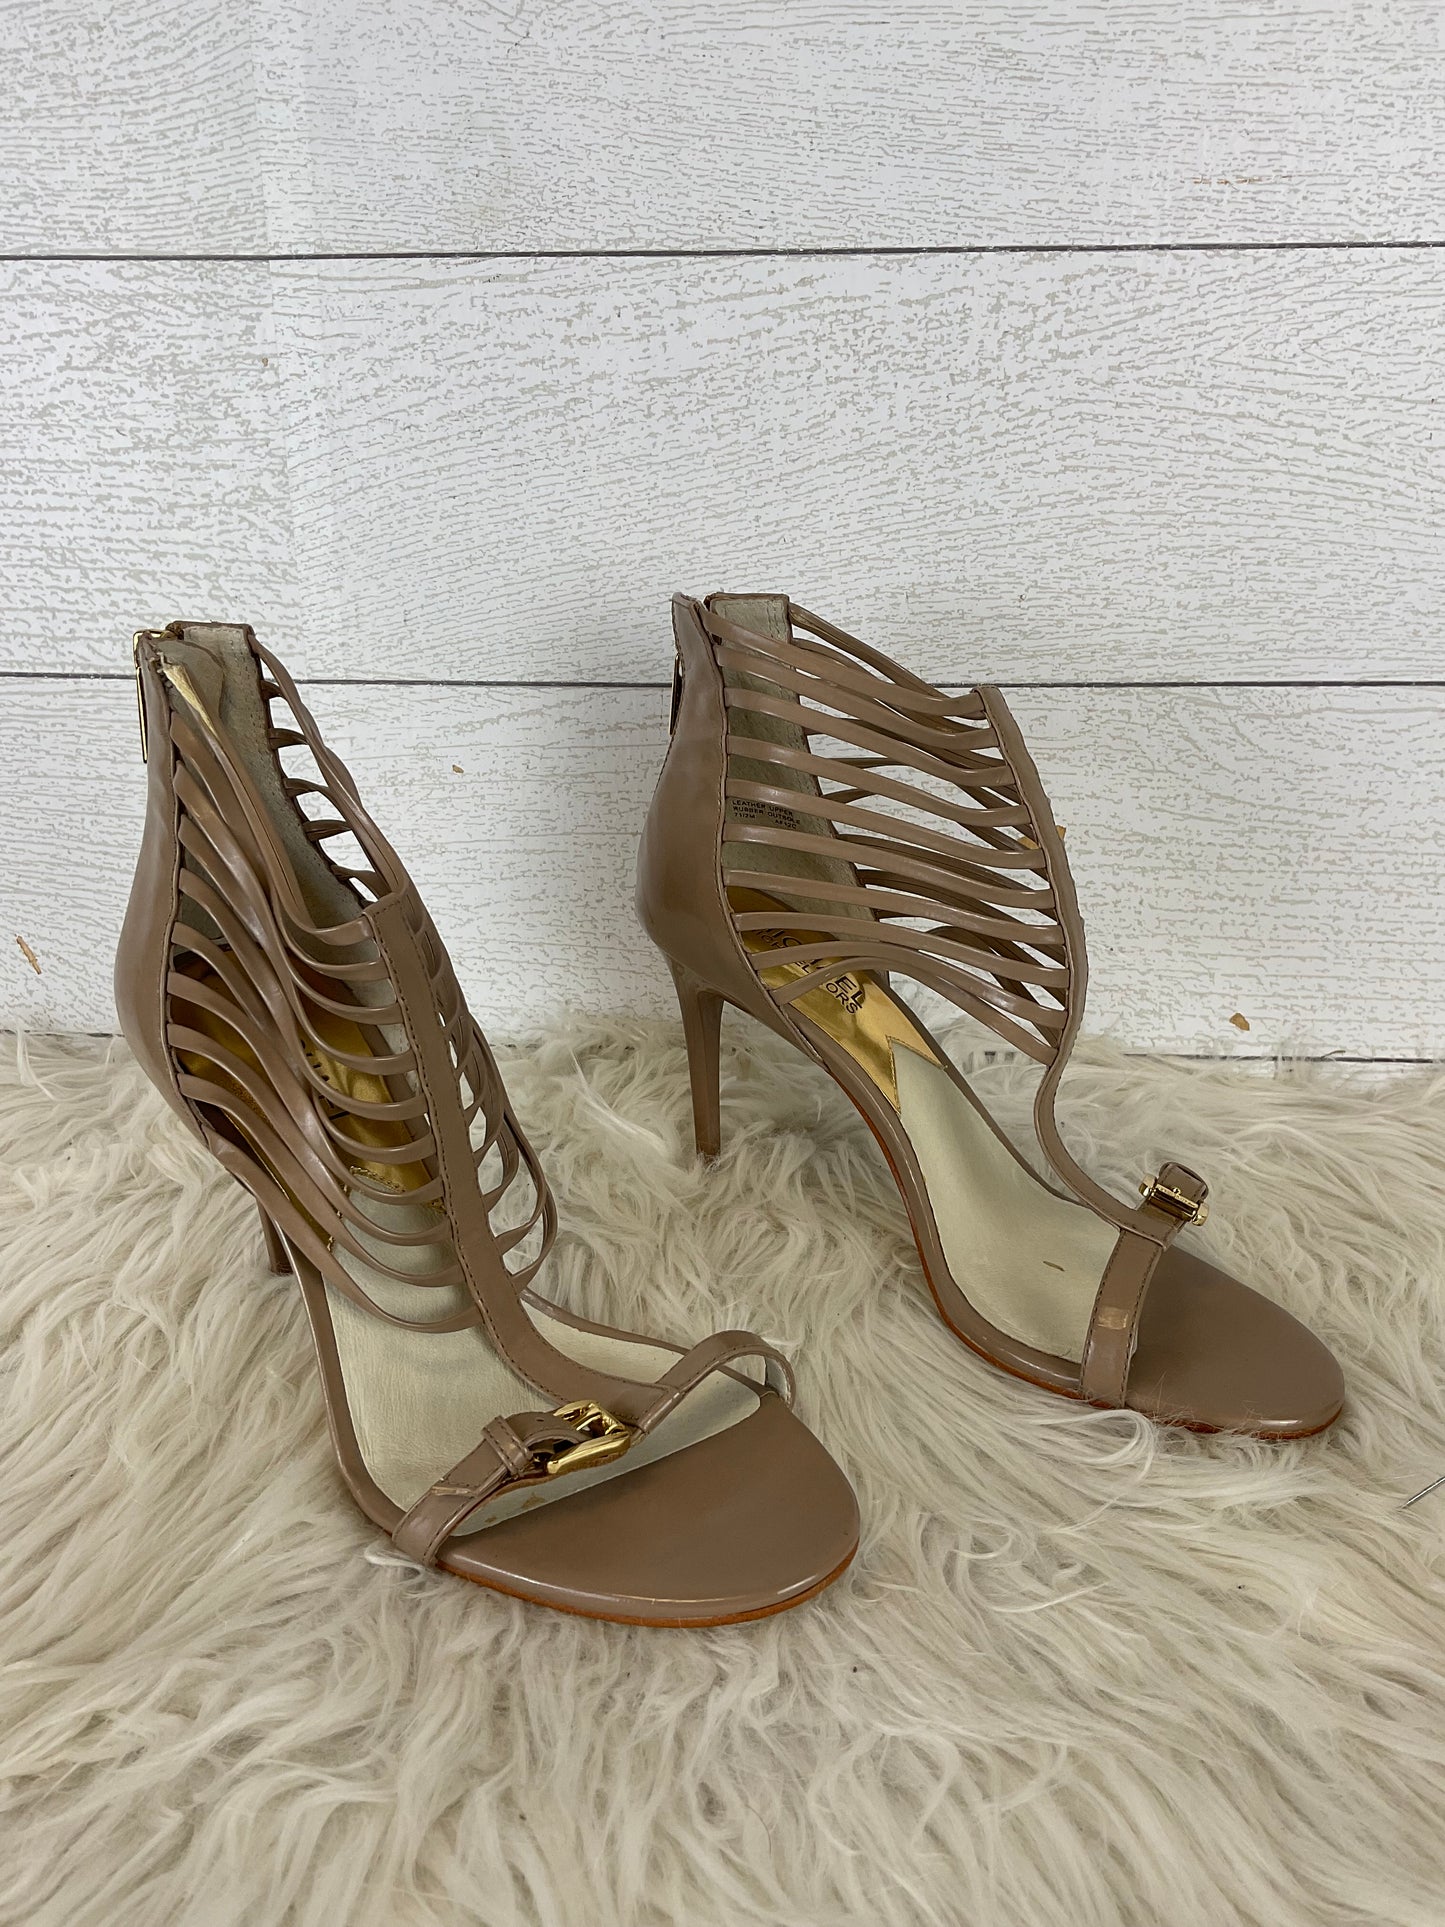 Shoes Heels Stiletto By Michael Kors  Size: 7.5